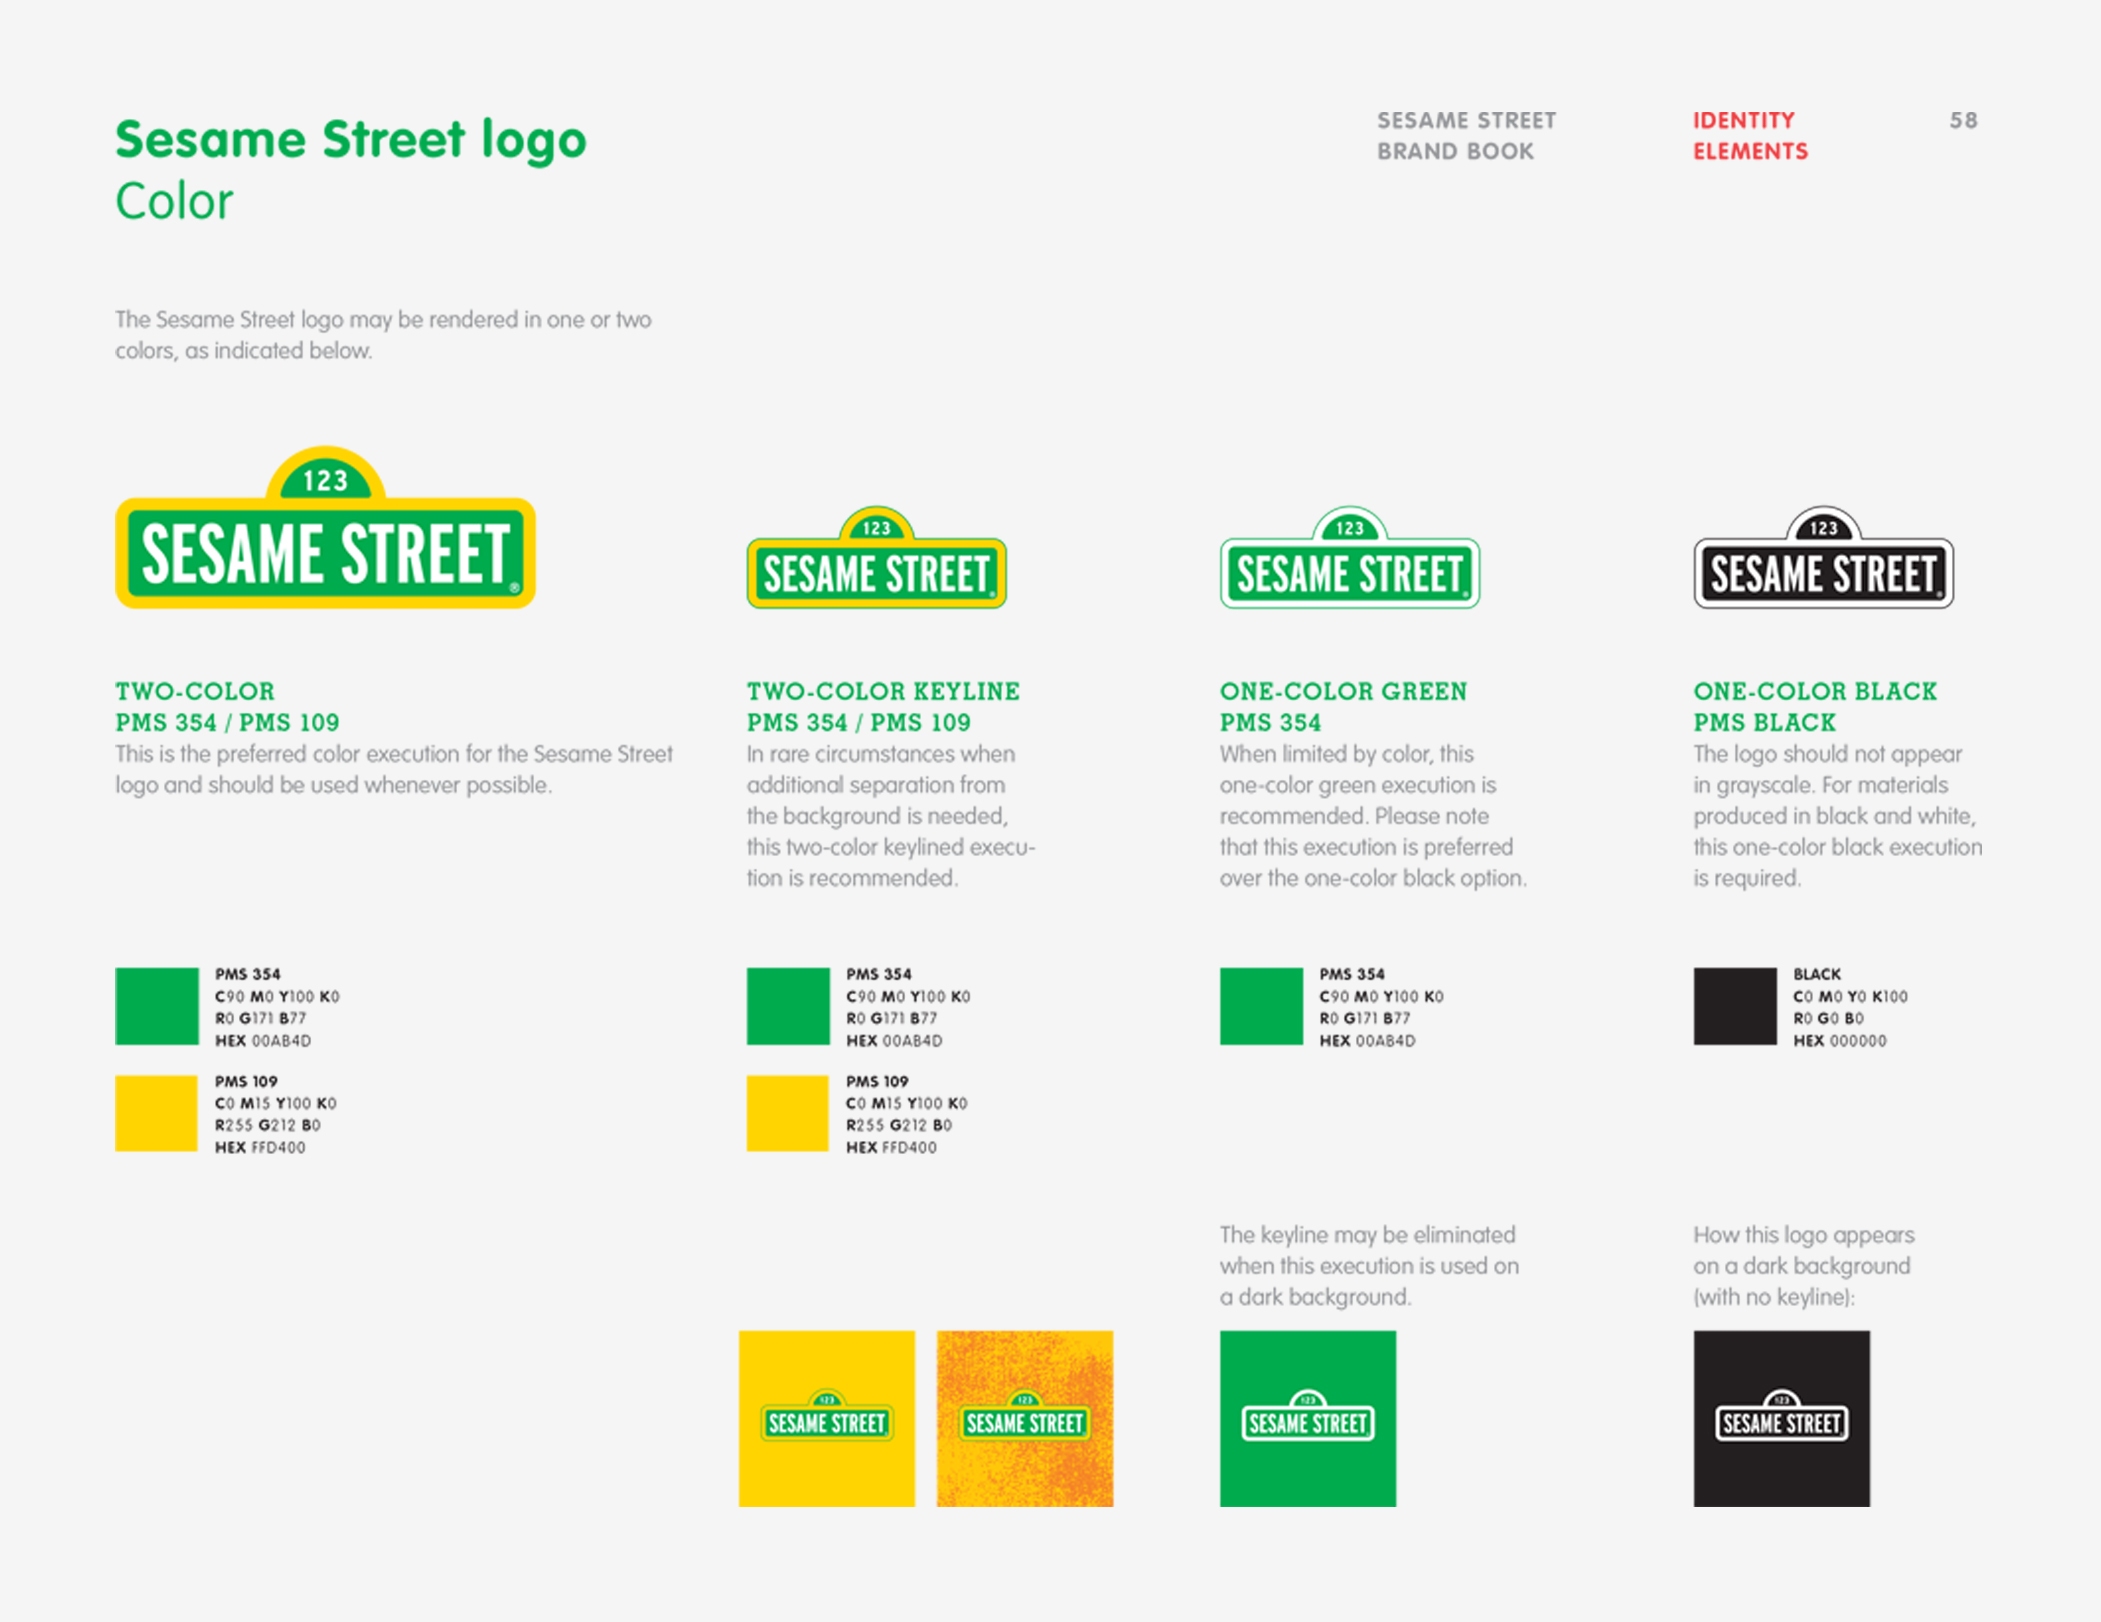 The logo color guidelines page from Sesame Workshop Brand Book.